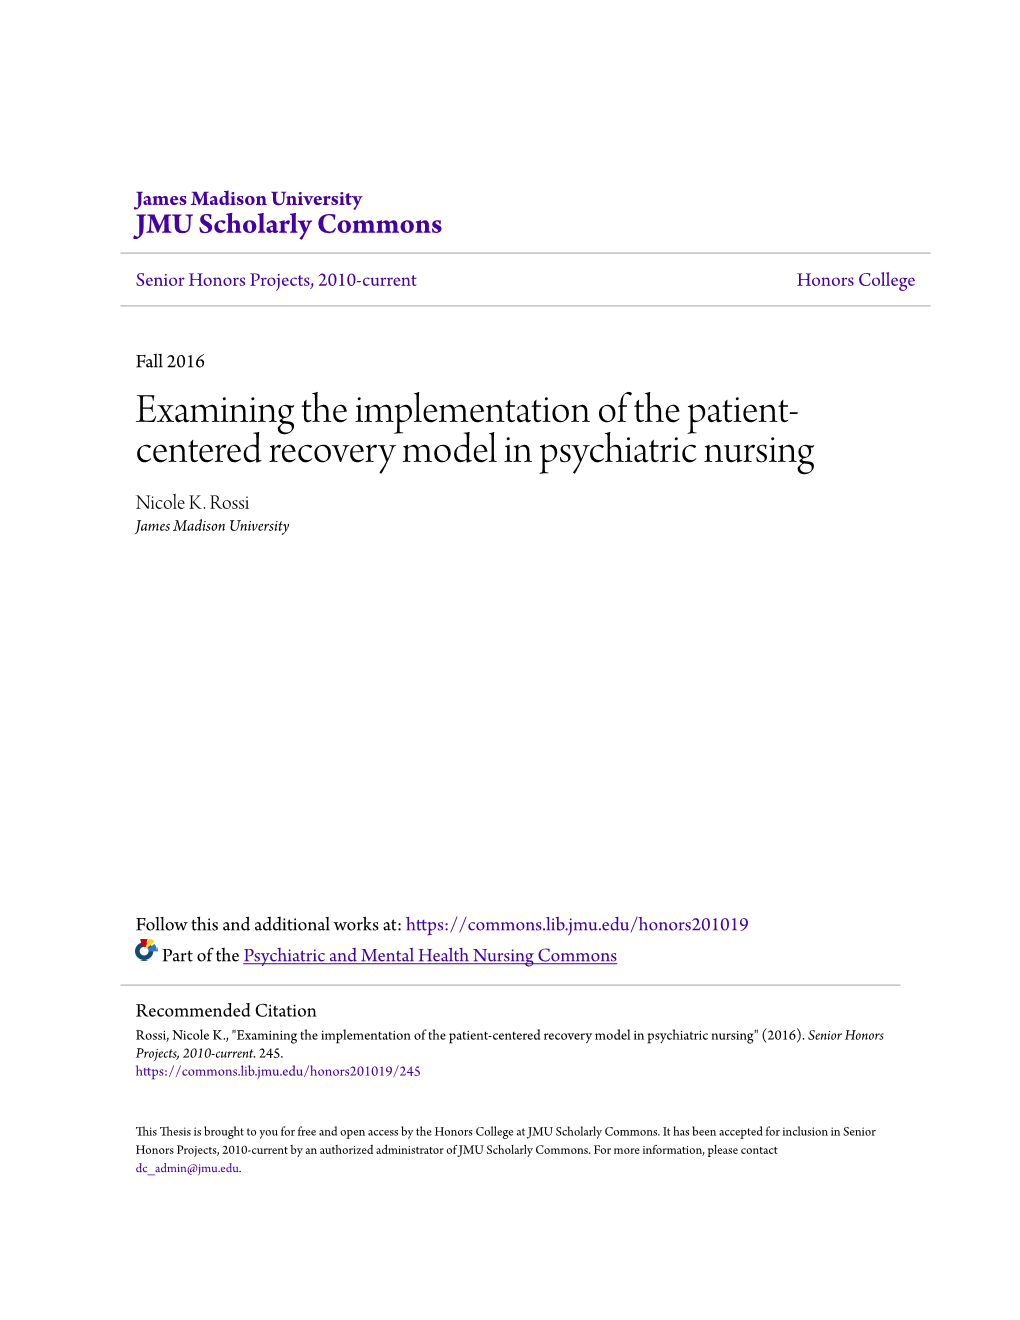 Examining the Implementation of the Patient-Centered Recovery Model in Psychiatric Nursing" (2016)